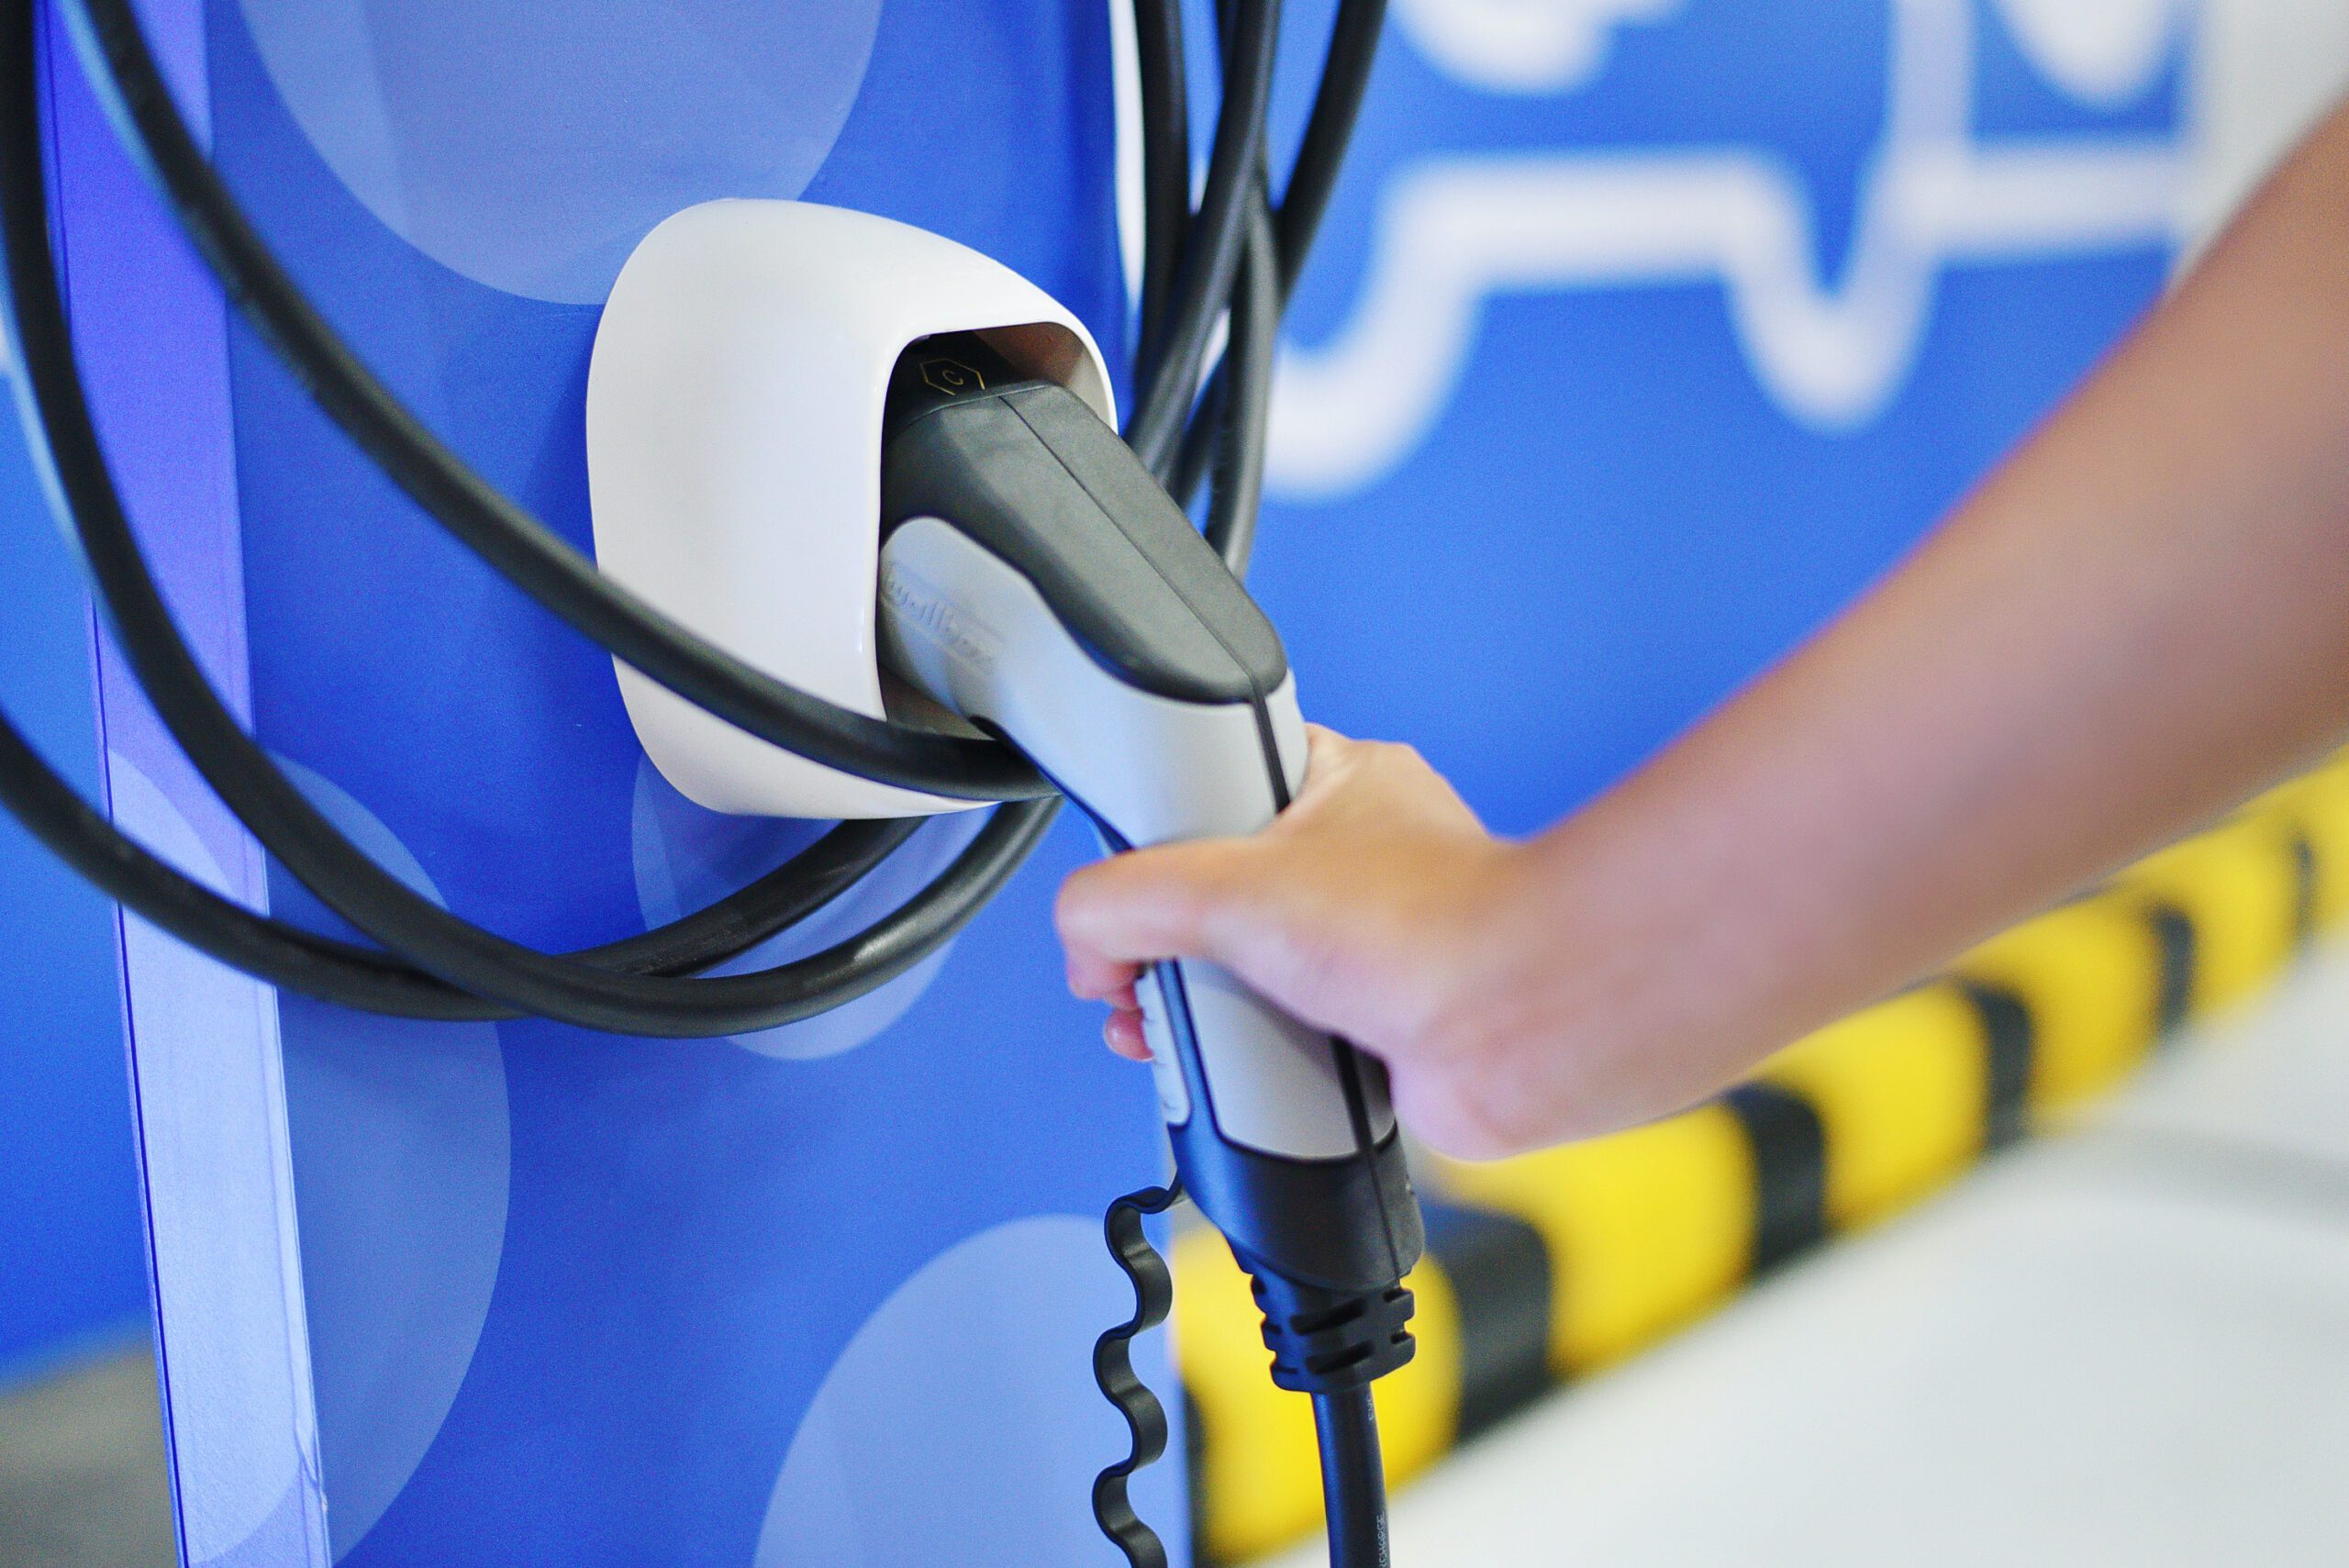 NEDA Board approves cutting tariffs on electric vehicles